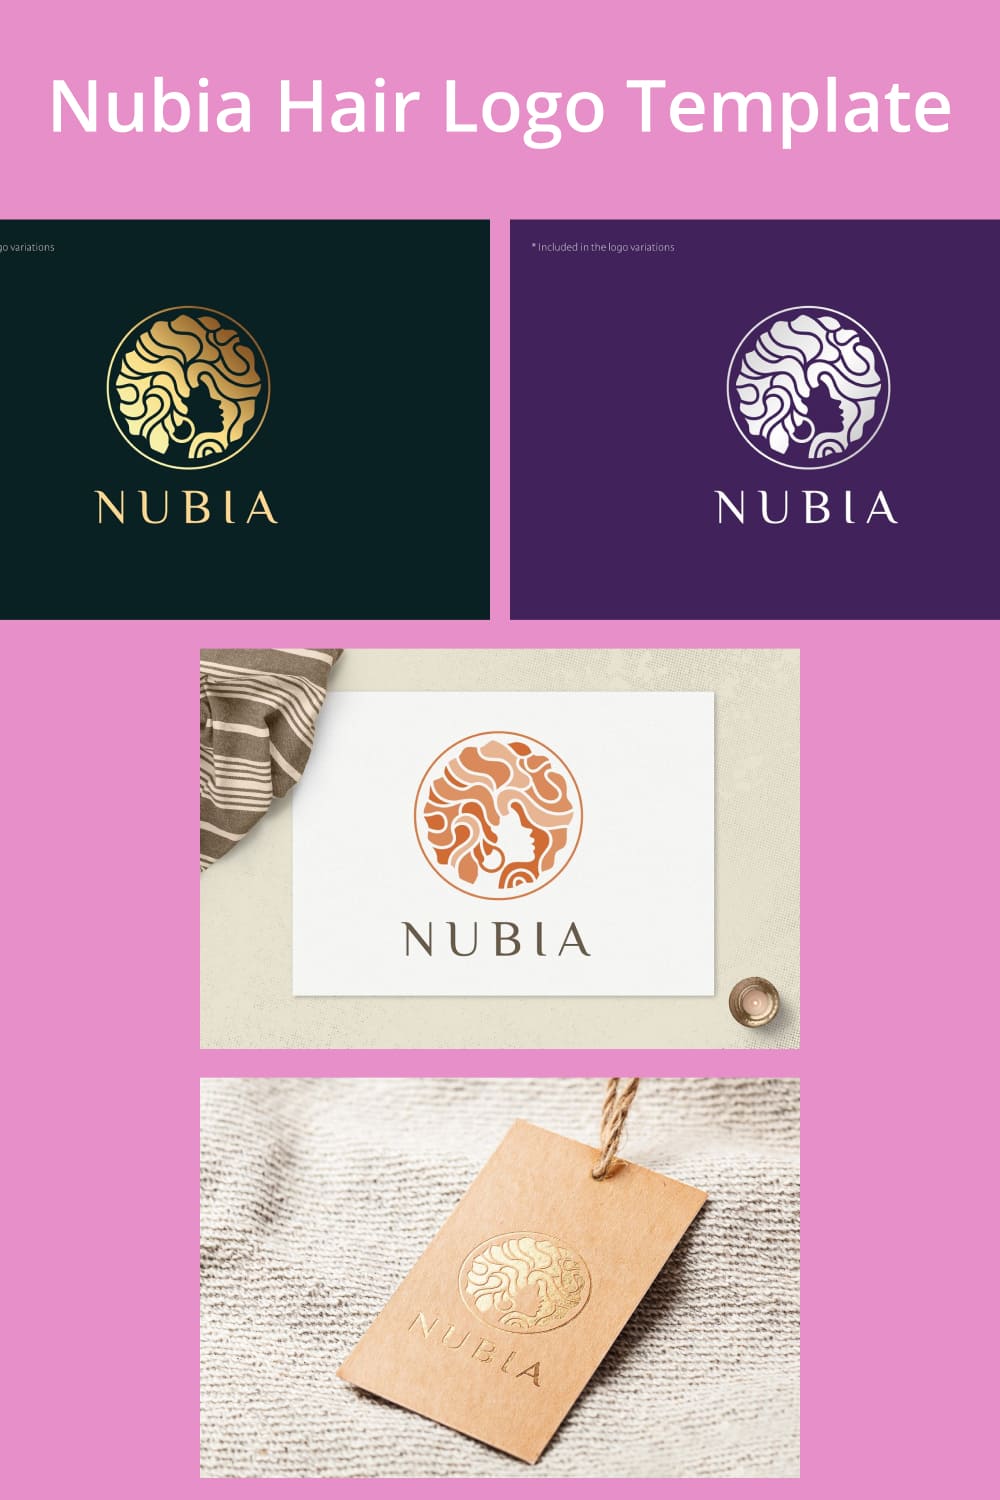 Nubia Hair Logo Template - pinterest image preview.